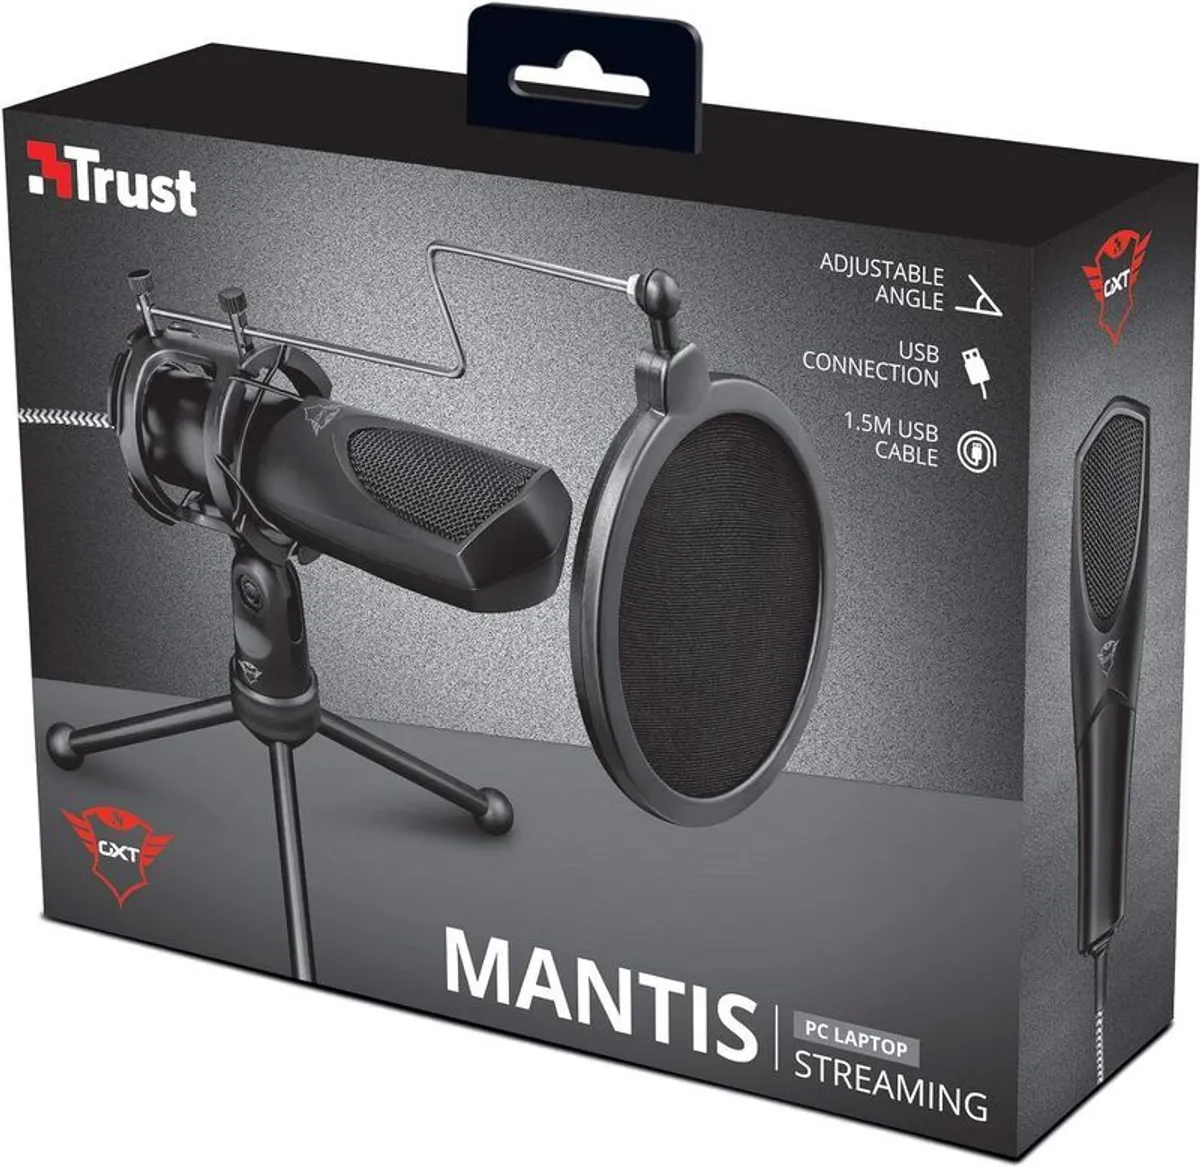 Trust Gaming GXT 232 Mantis Streaming Gaming Microphone for PC, PS4 and PS5 - Image 1